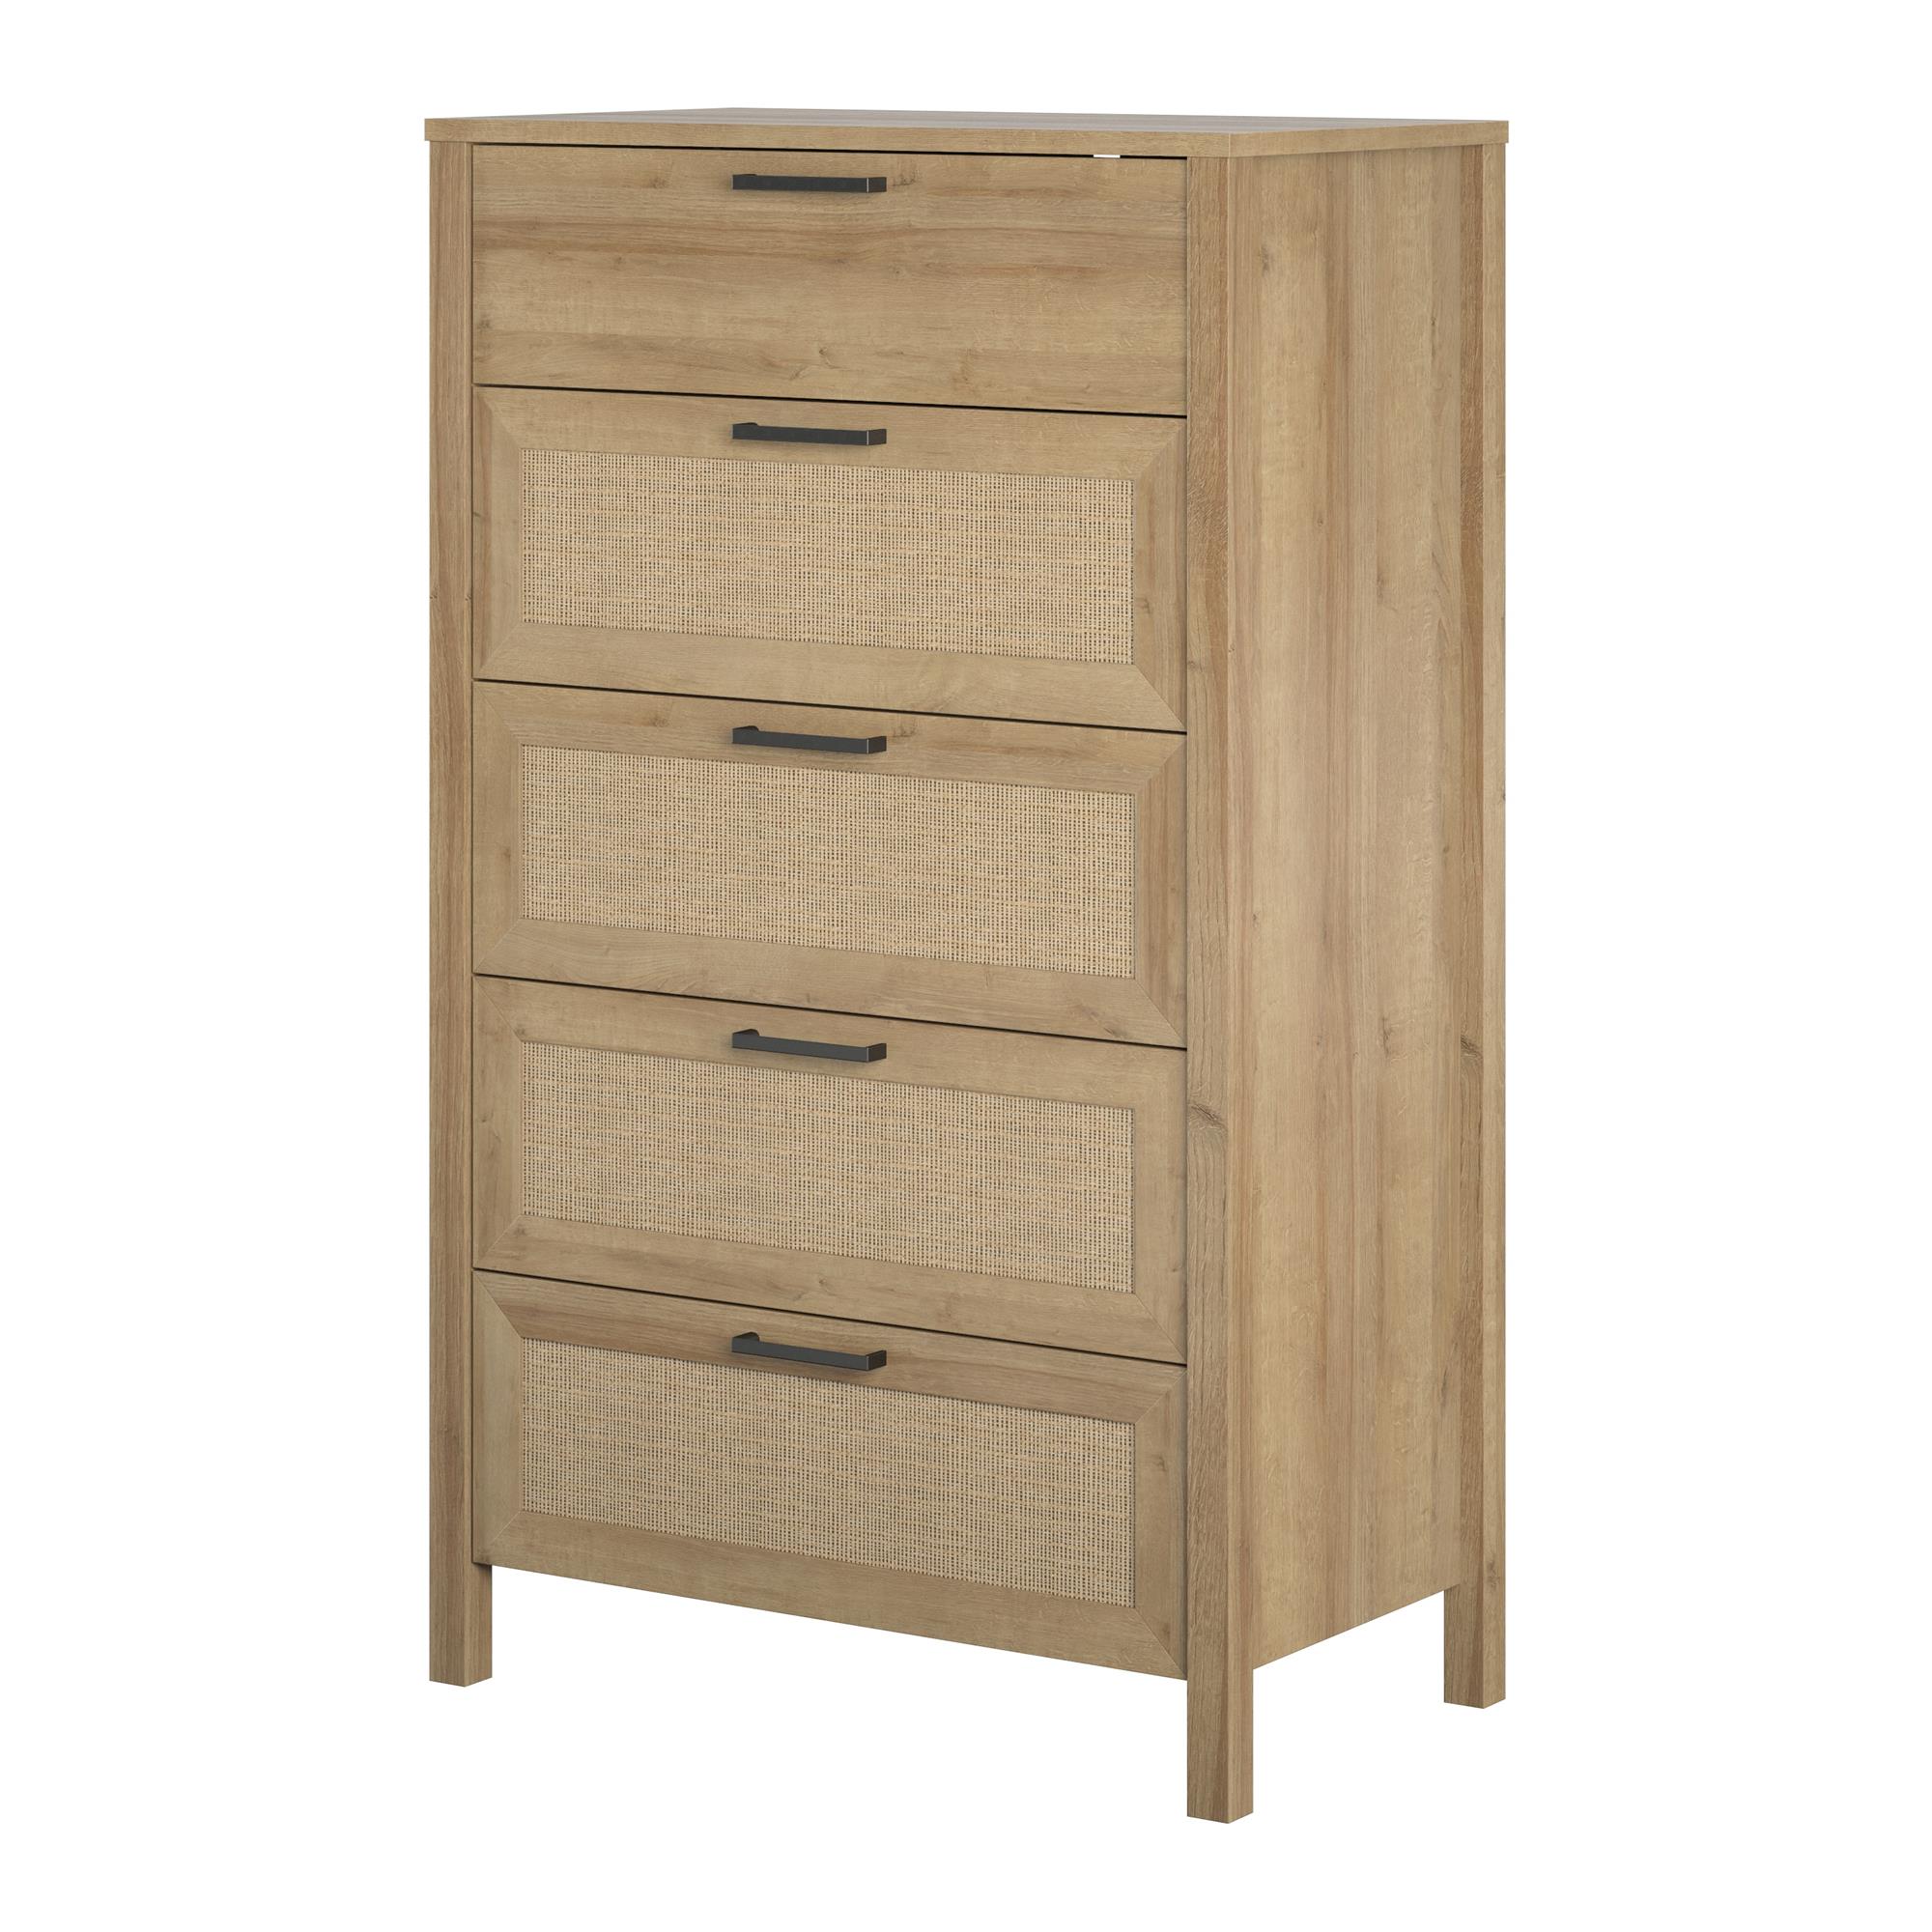 Ameriwood Home Wimberly 5-Drawer Dresser, Natural with Faux Rattan - image 5 of 12